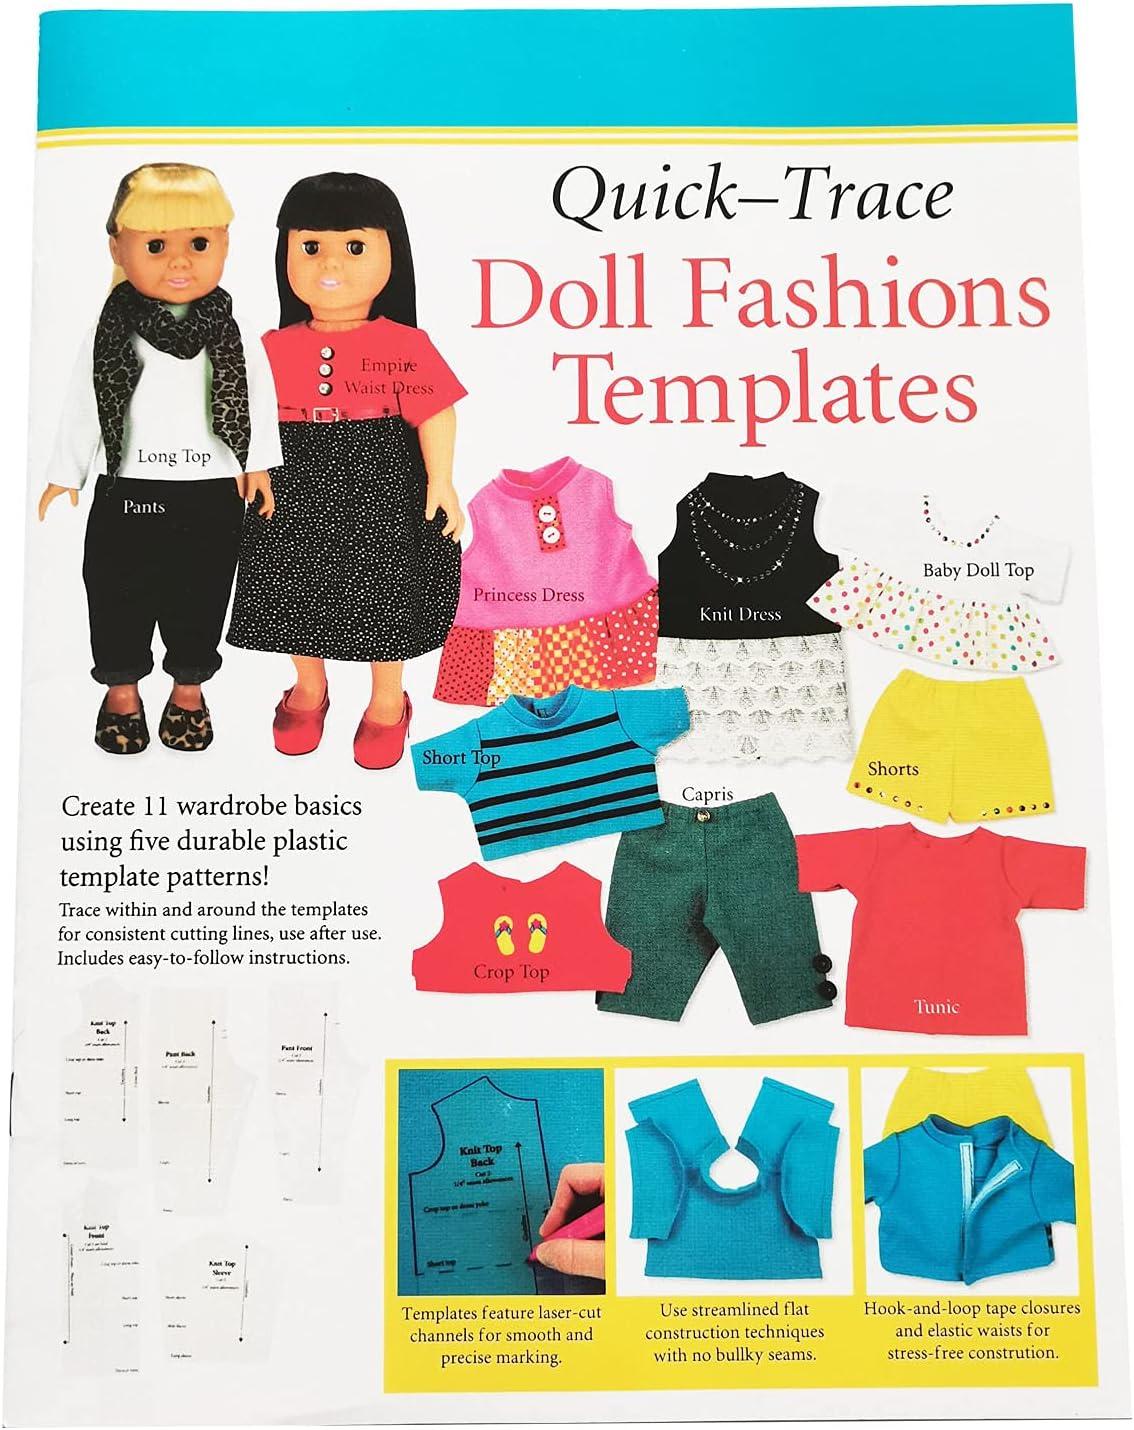 YICBOR Quilting Rulers and Templates, Quick-Trace Doll Fashions Templates  Wardrobe Basic Using Five Durable Plastic Template Patterns(1Set5pcs)